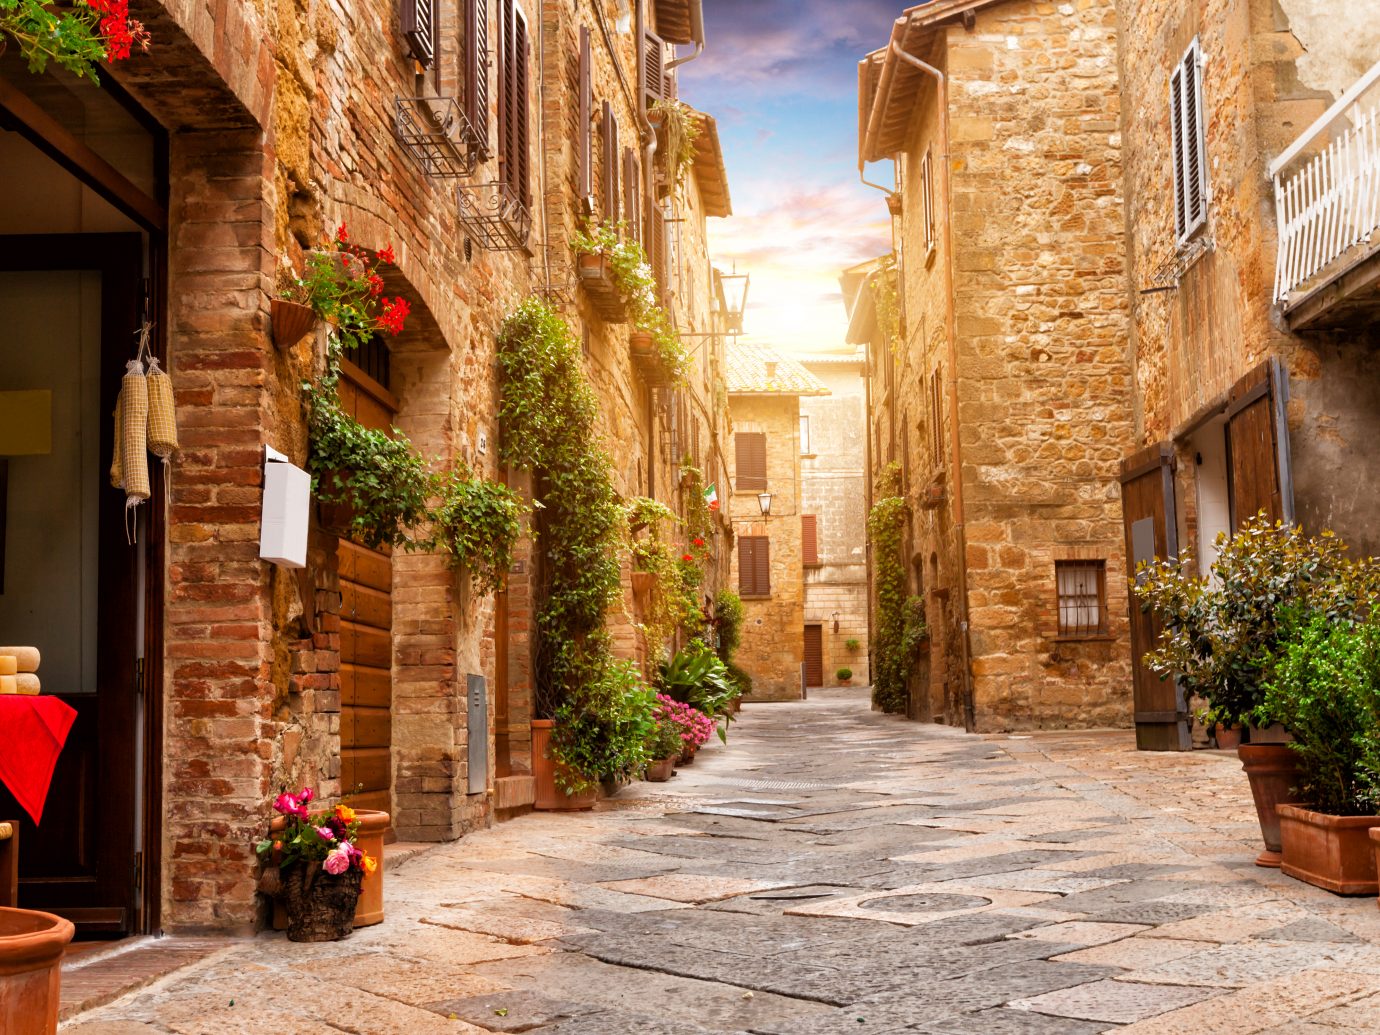 Colorful street in Pienza Italy